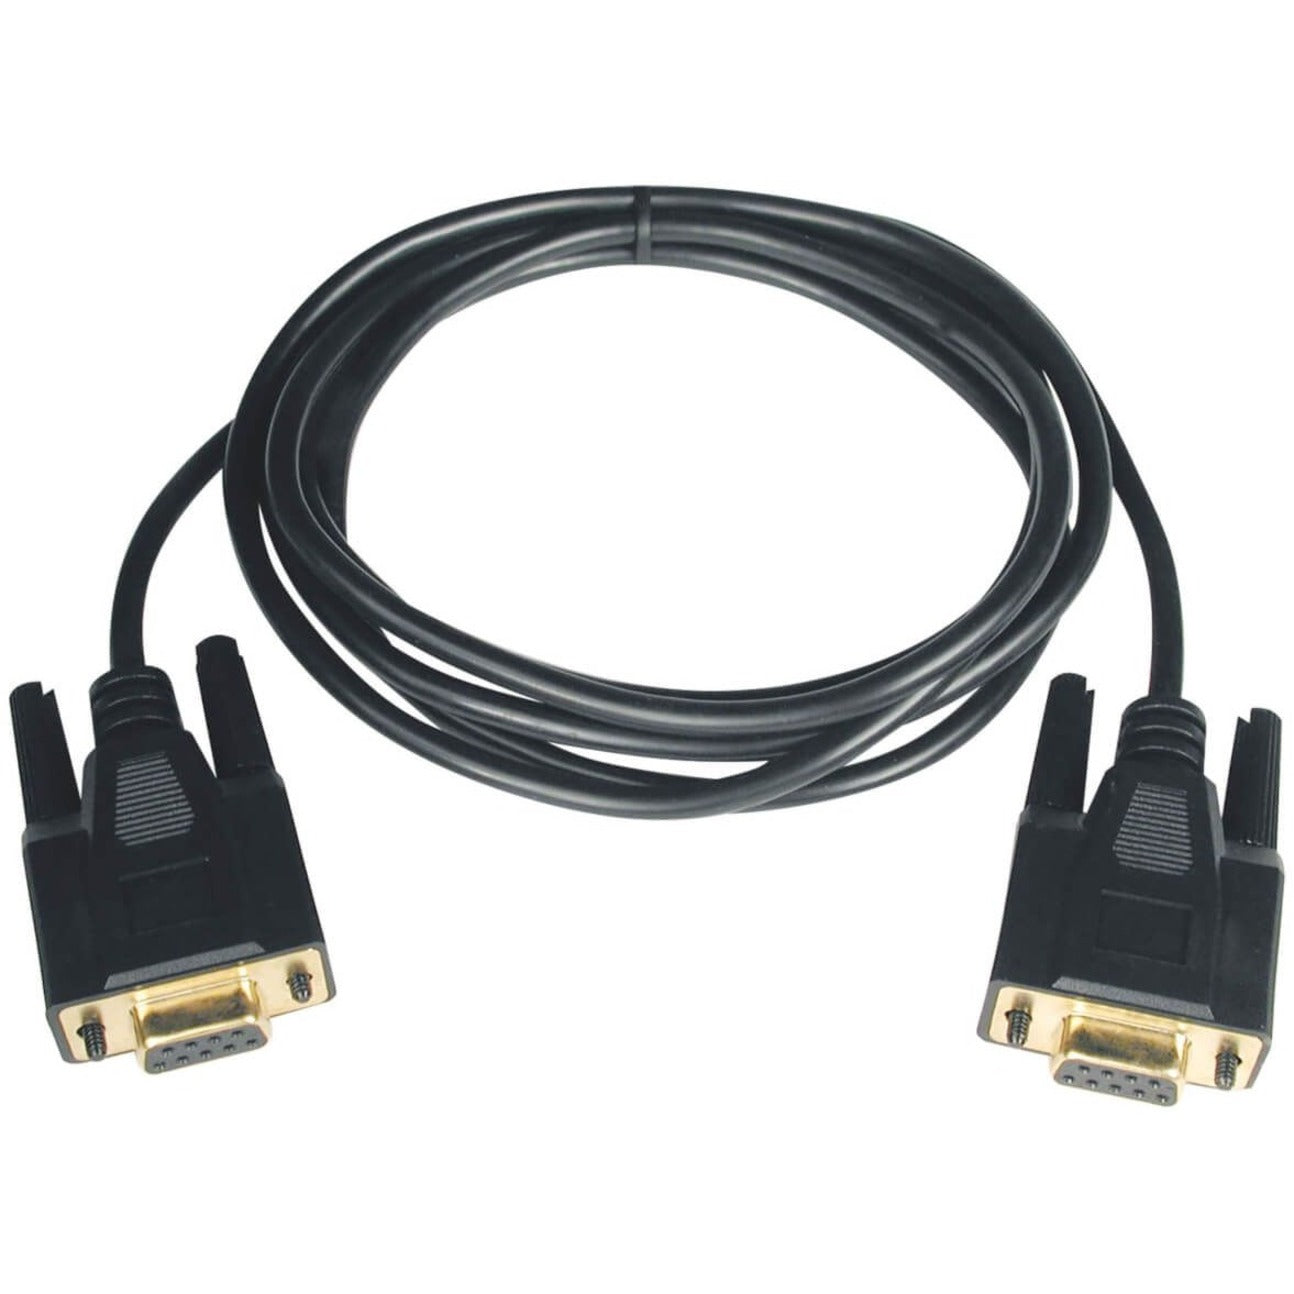 Tripp Lite P450-010 Null Modem Serial Cable, 10 ft, Molded, Copper Conductor, Shielded, Gold Plated Connectors, Black